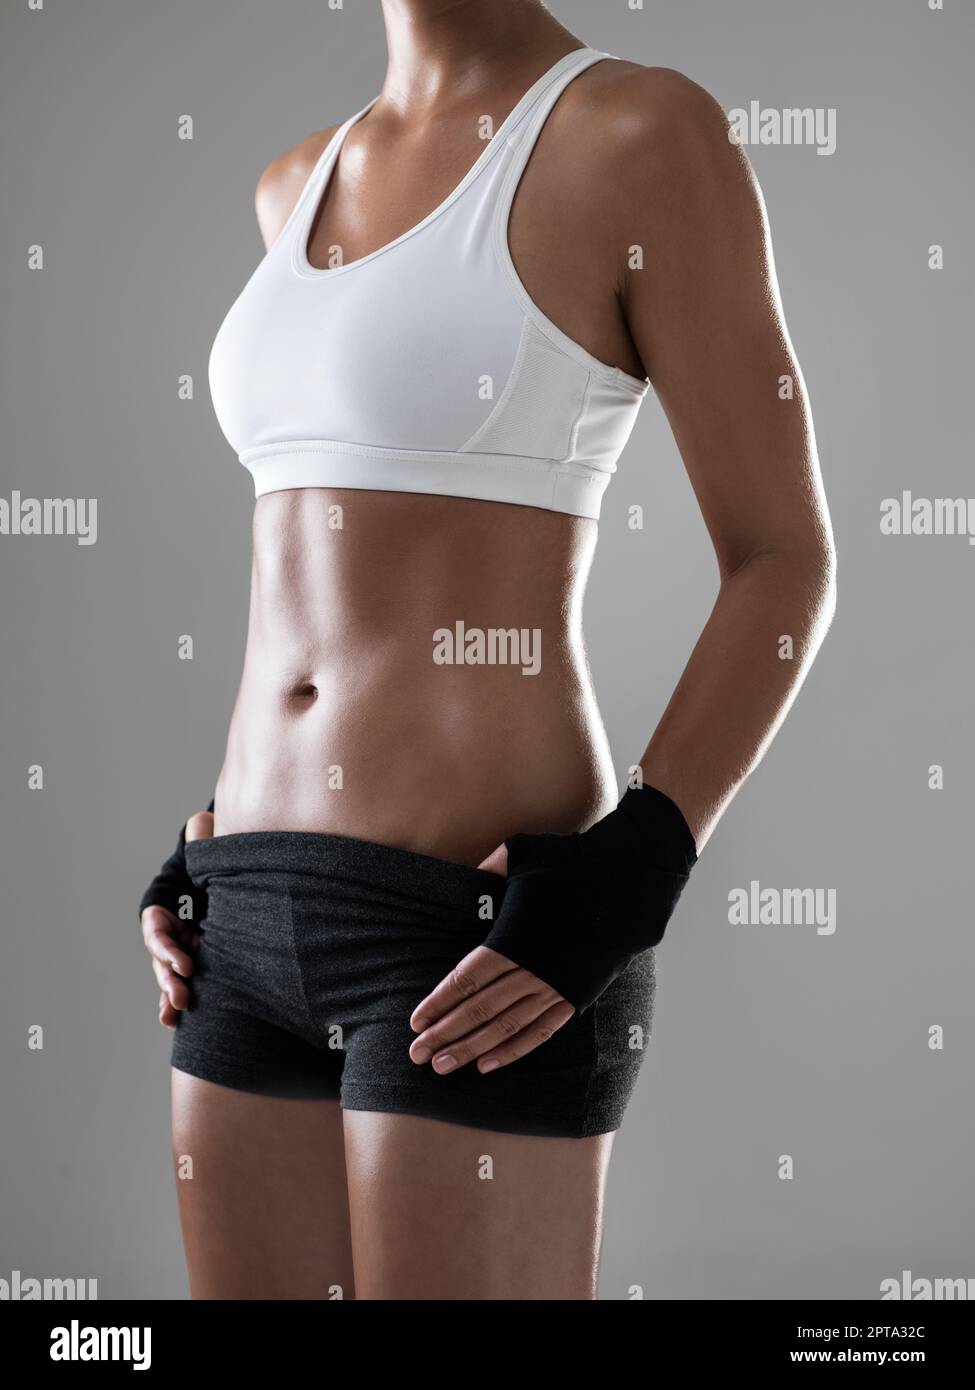 Fitness Exercise Sport Young Woman in Fashion Sportswear. Cropped Closeup  of the Sexy Boobs Girl, Muscular Body, Tan Skin and Strong Six Pack Abs.  Fem Stock Photo - Alamy